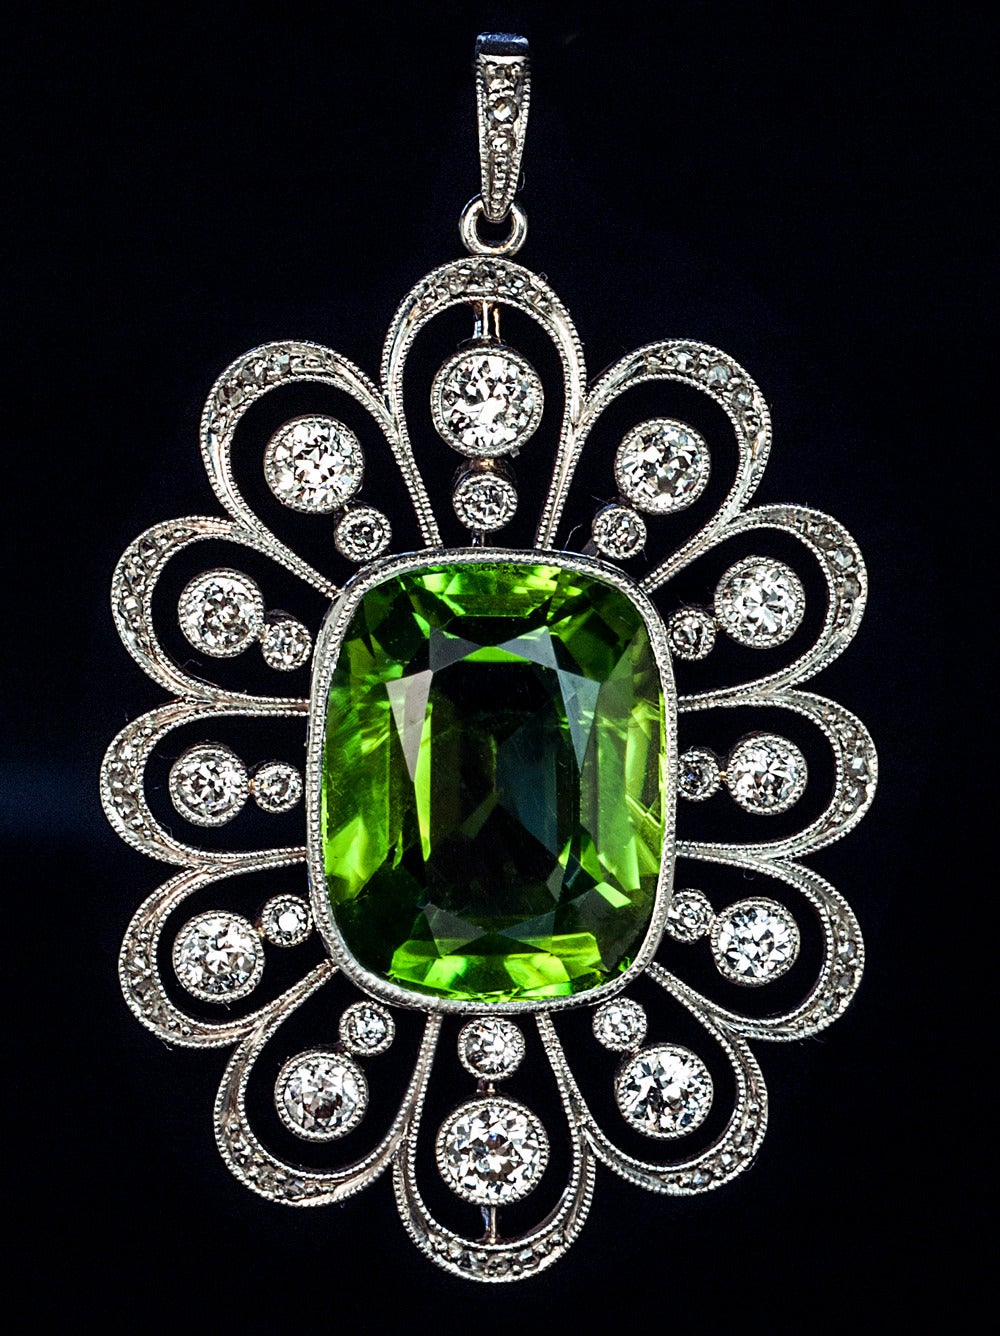 St. Petersburg, circa 1930

The pendant is designed as an openwork flower head, crafted in platinum and 14K gold, centered with a large cushion cut sparkling lime green peridot, called chrysolite (golden stone) in Russia.

Peridots / chrysolites